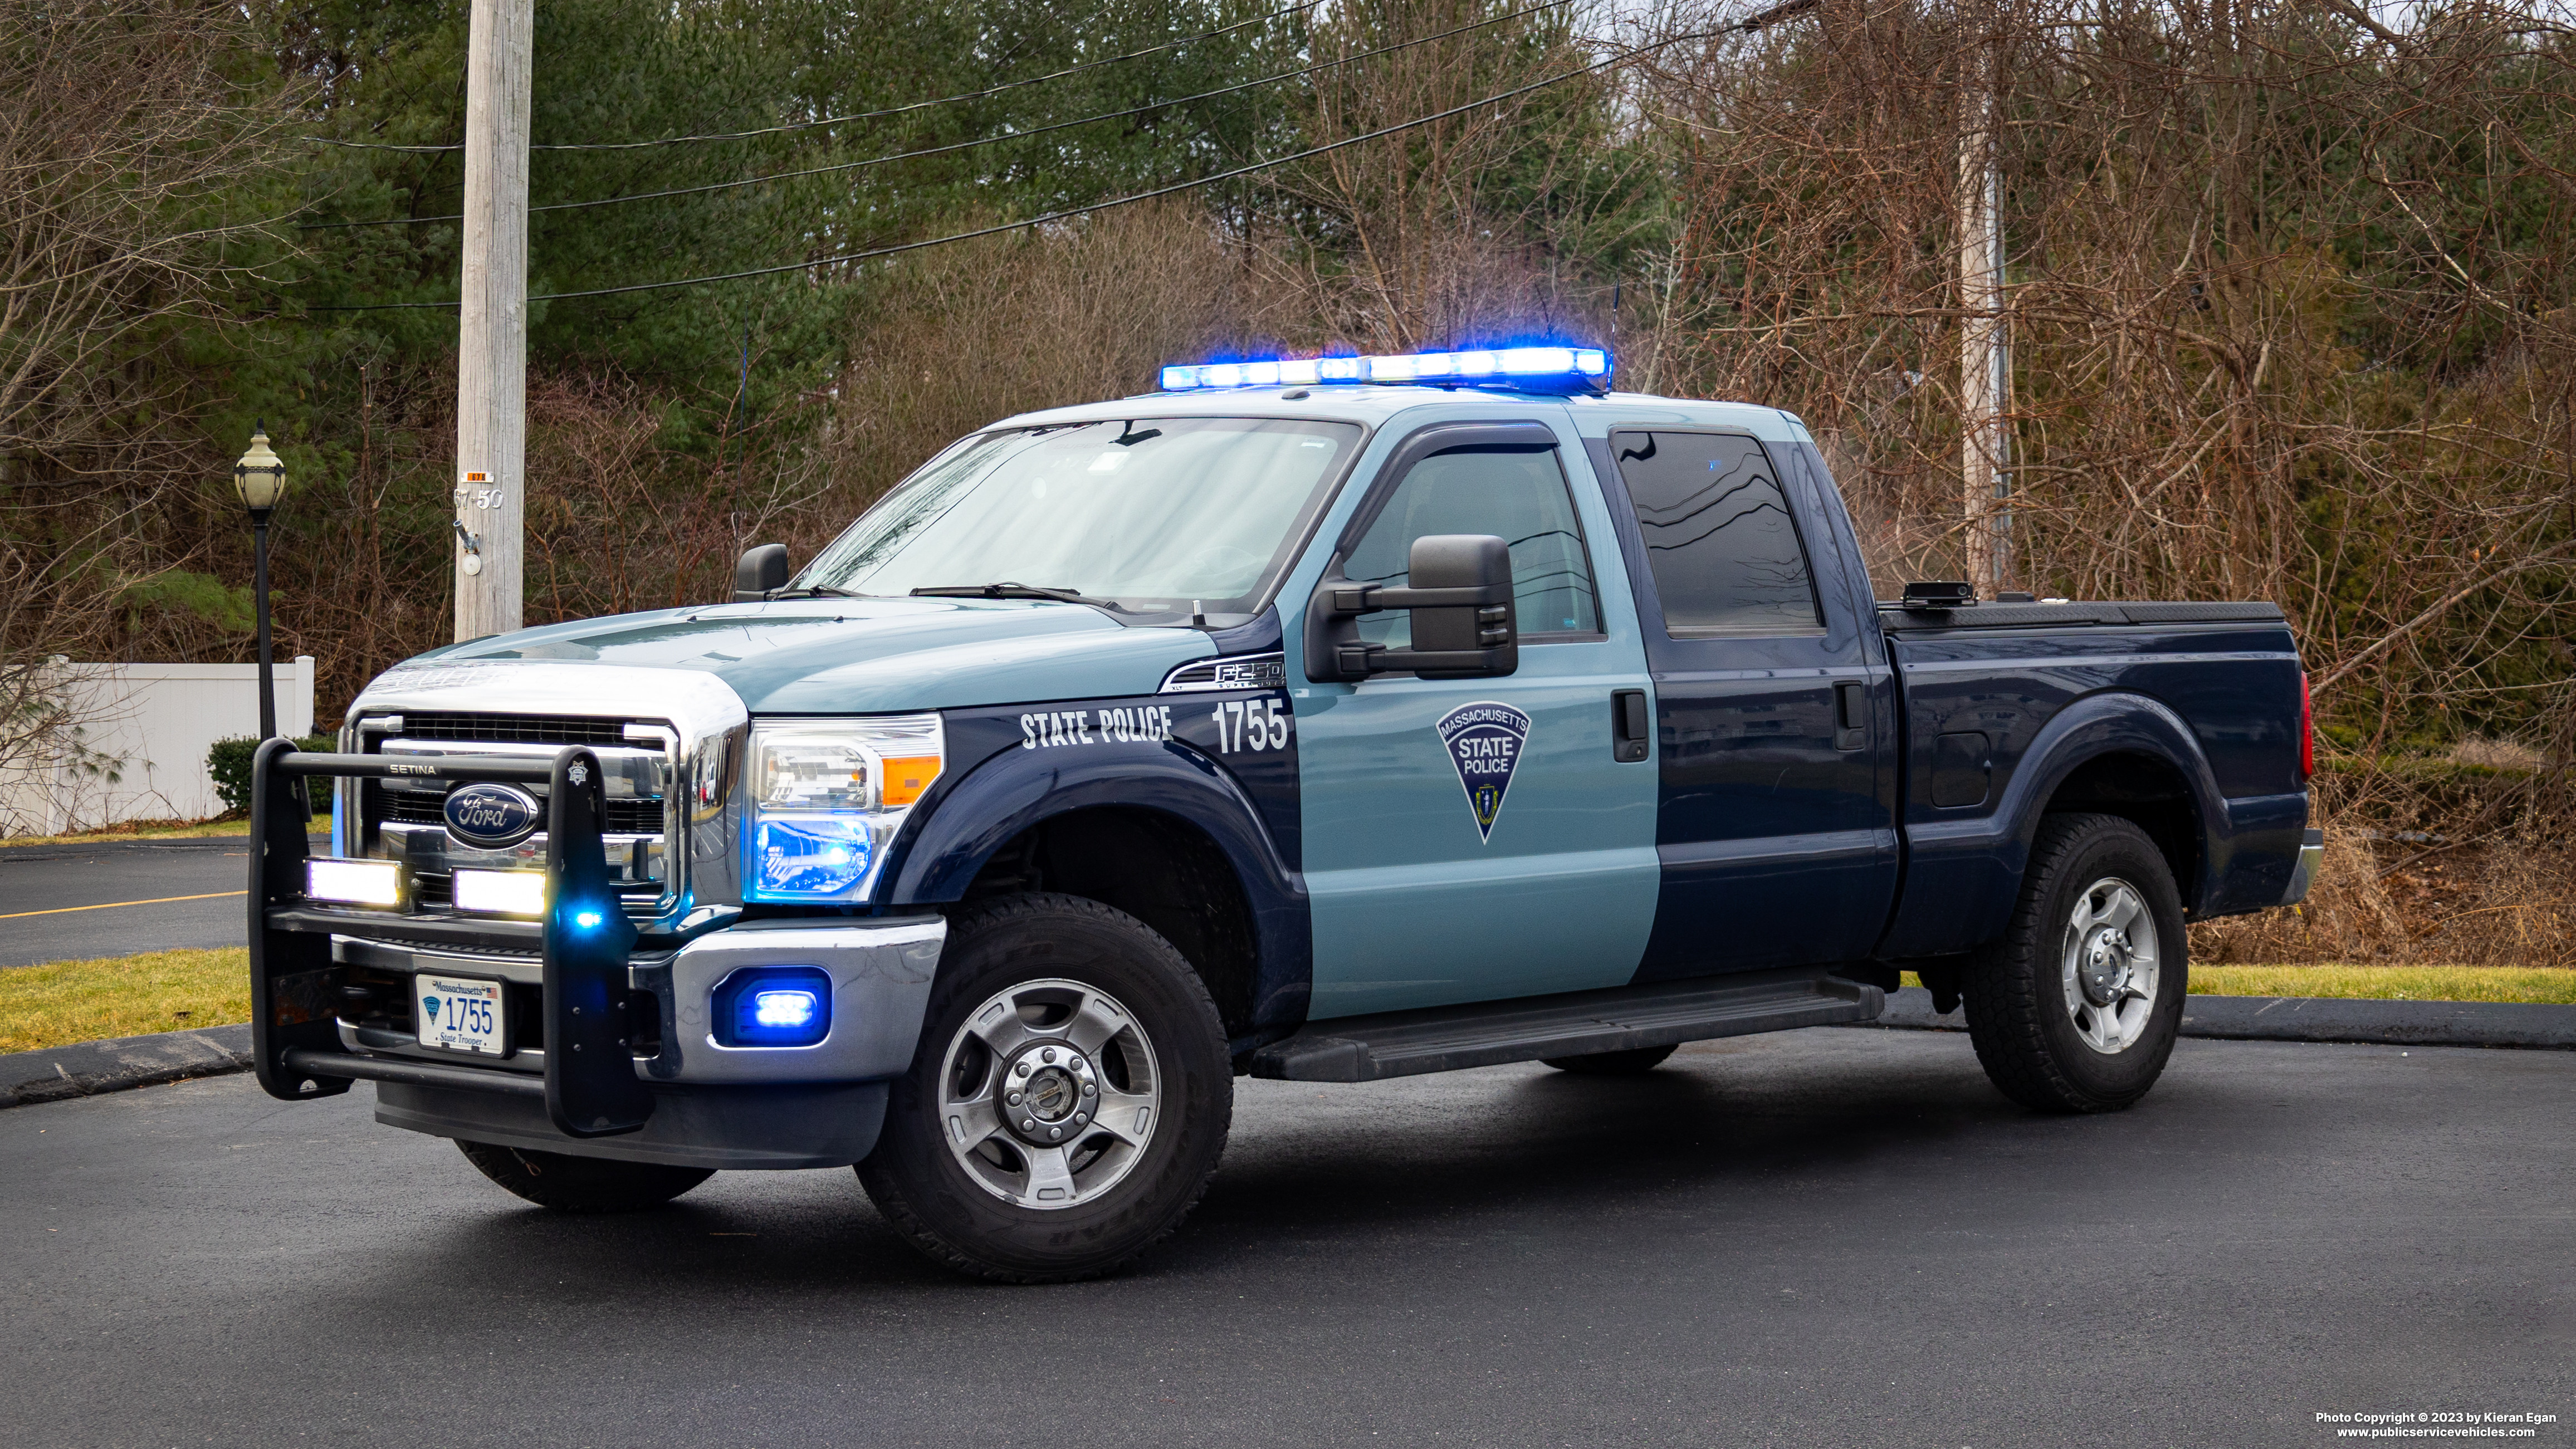 A photo  of Massachusetts State Police
            Cruiser 1755, a 2015 Ford F-250 XLT Crew Cab             taken by Kieran Egan